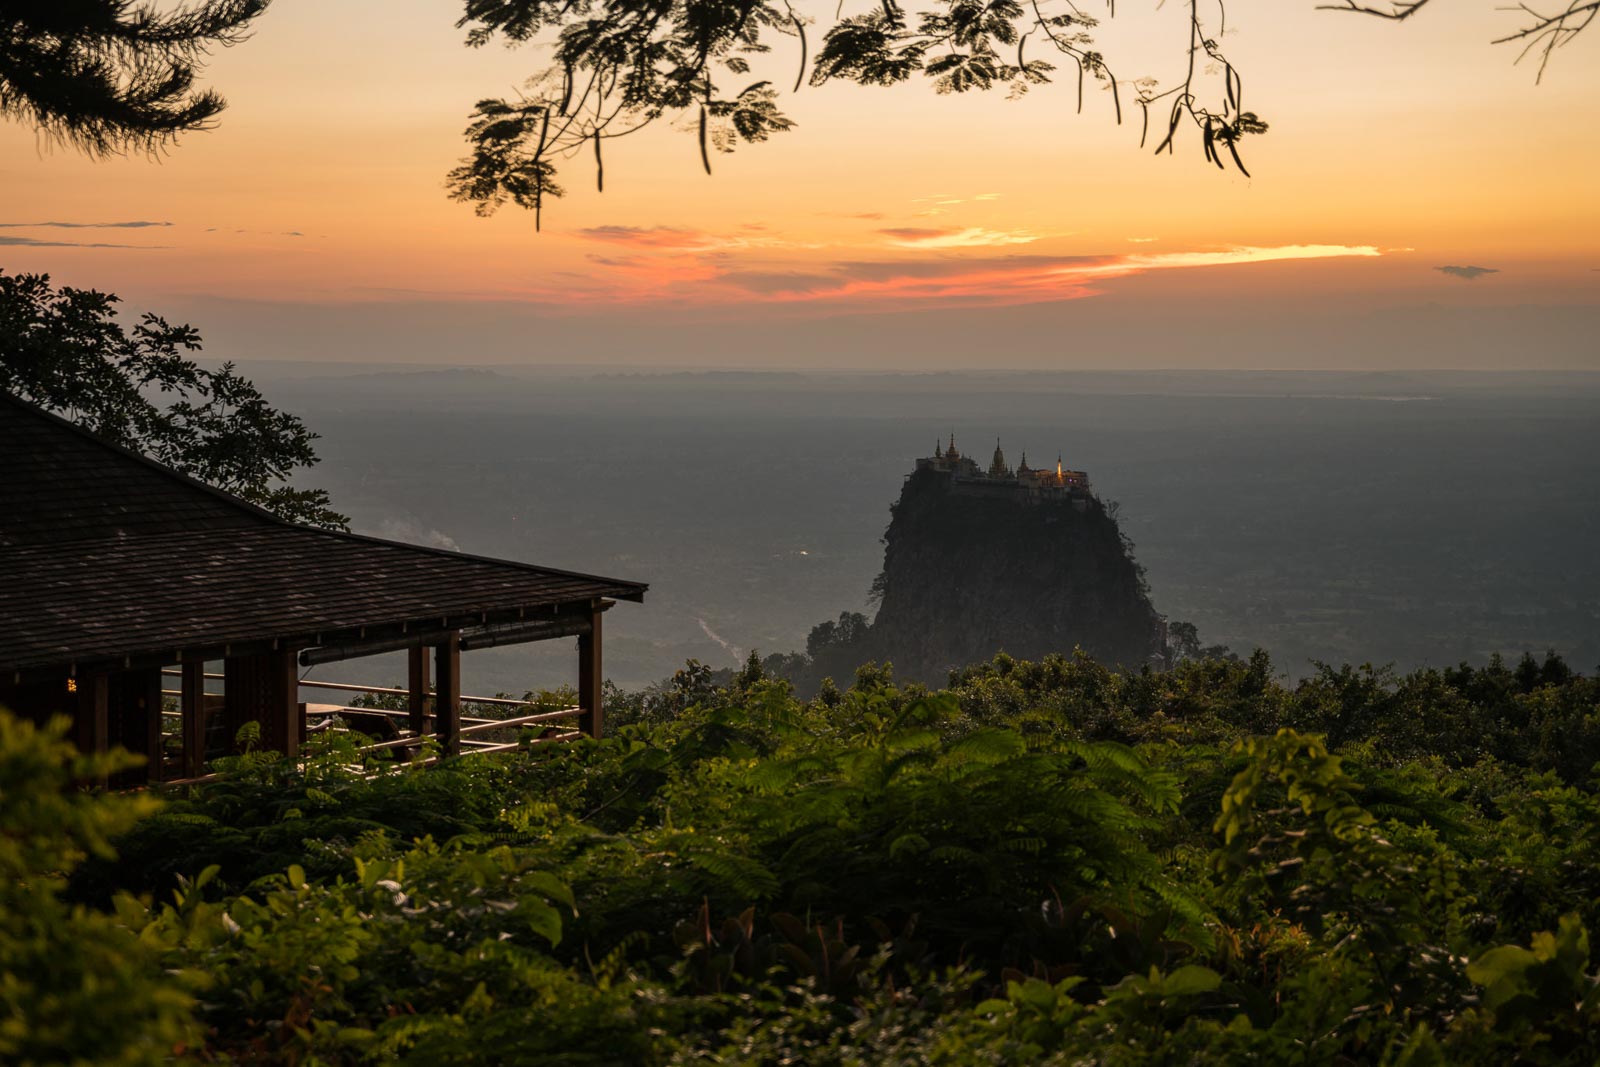 ABOUT MOUNT POPA